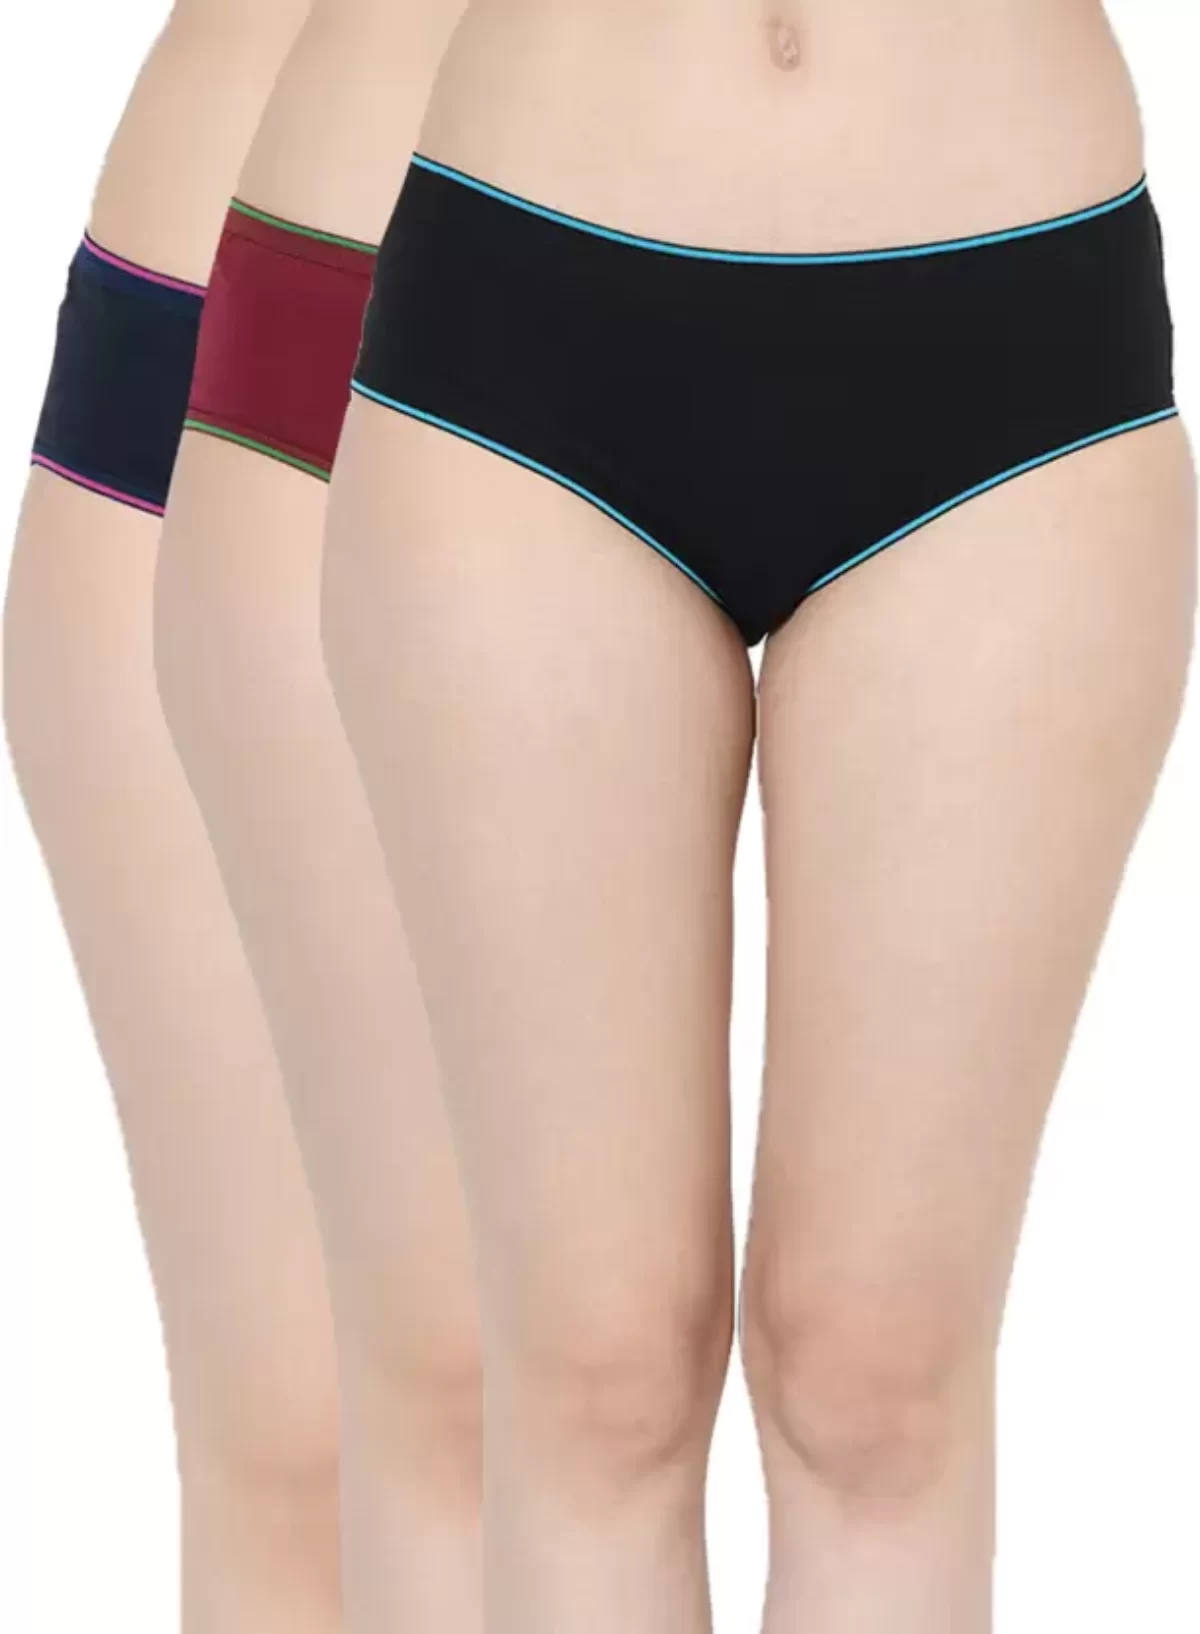 Top Broad Elastic Bodycare Cotton Hipster Panty #2912 Pack of 3